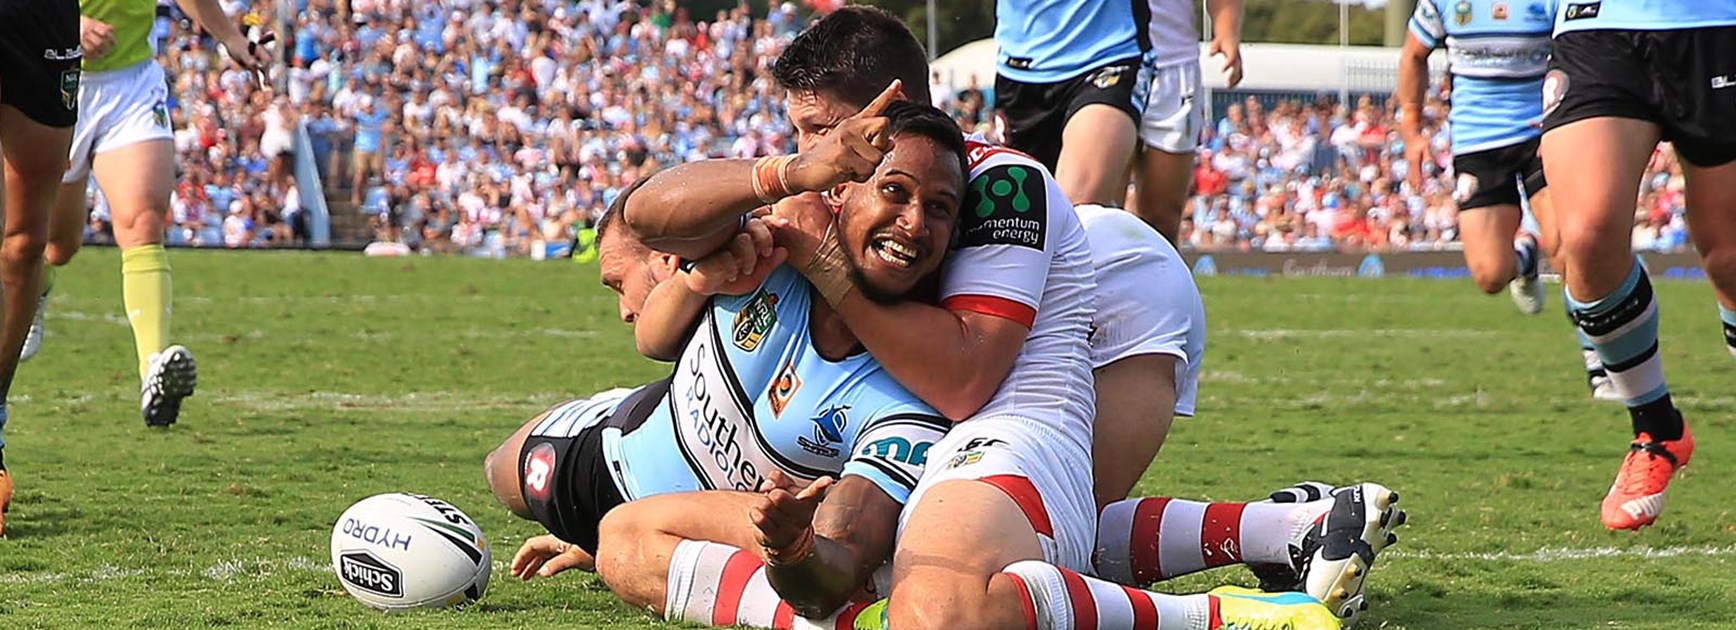 Ben Barba showed some vintage pace to score against the Dragons in Round 2.